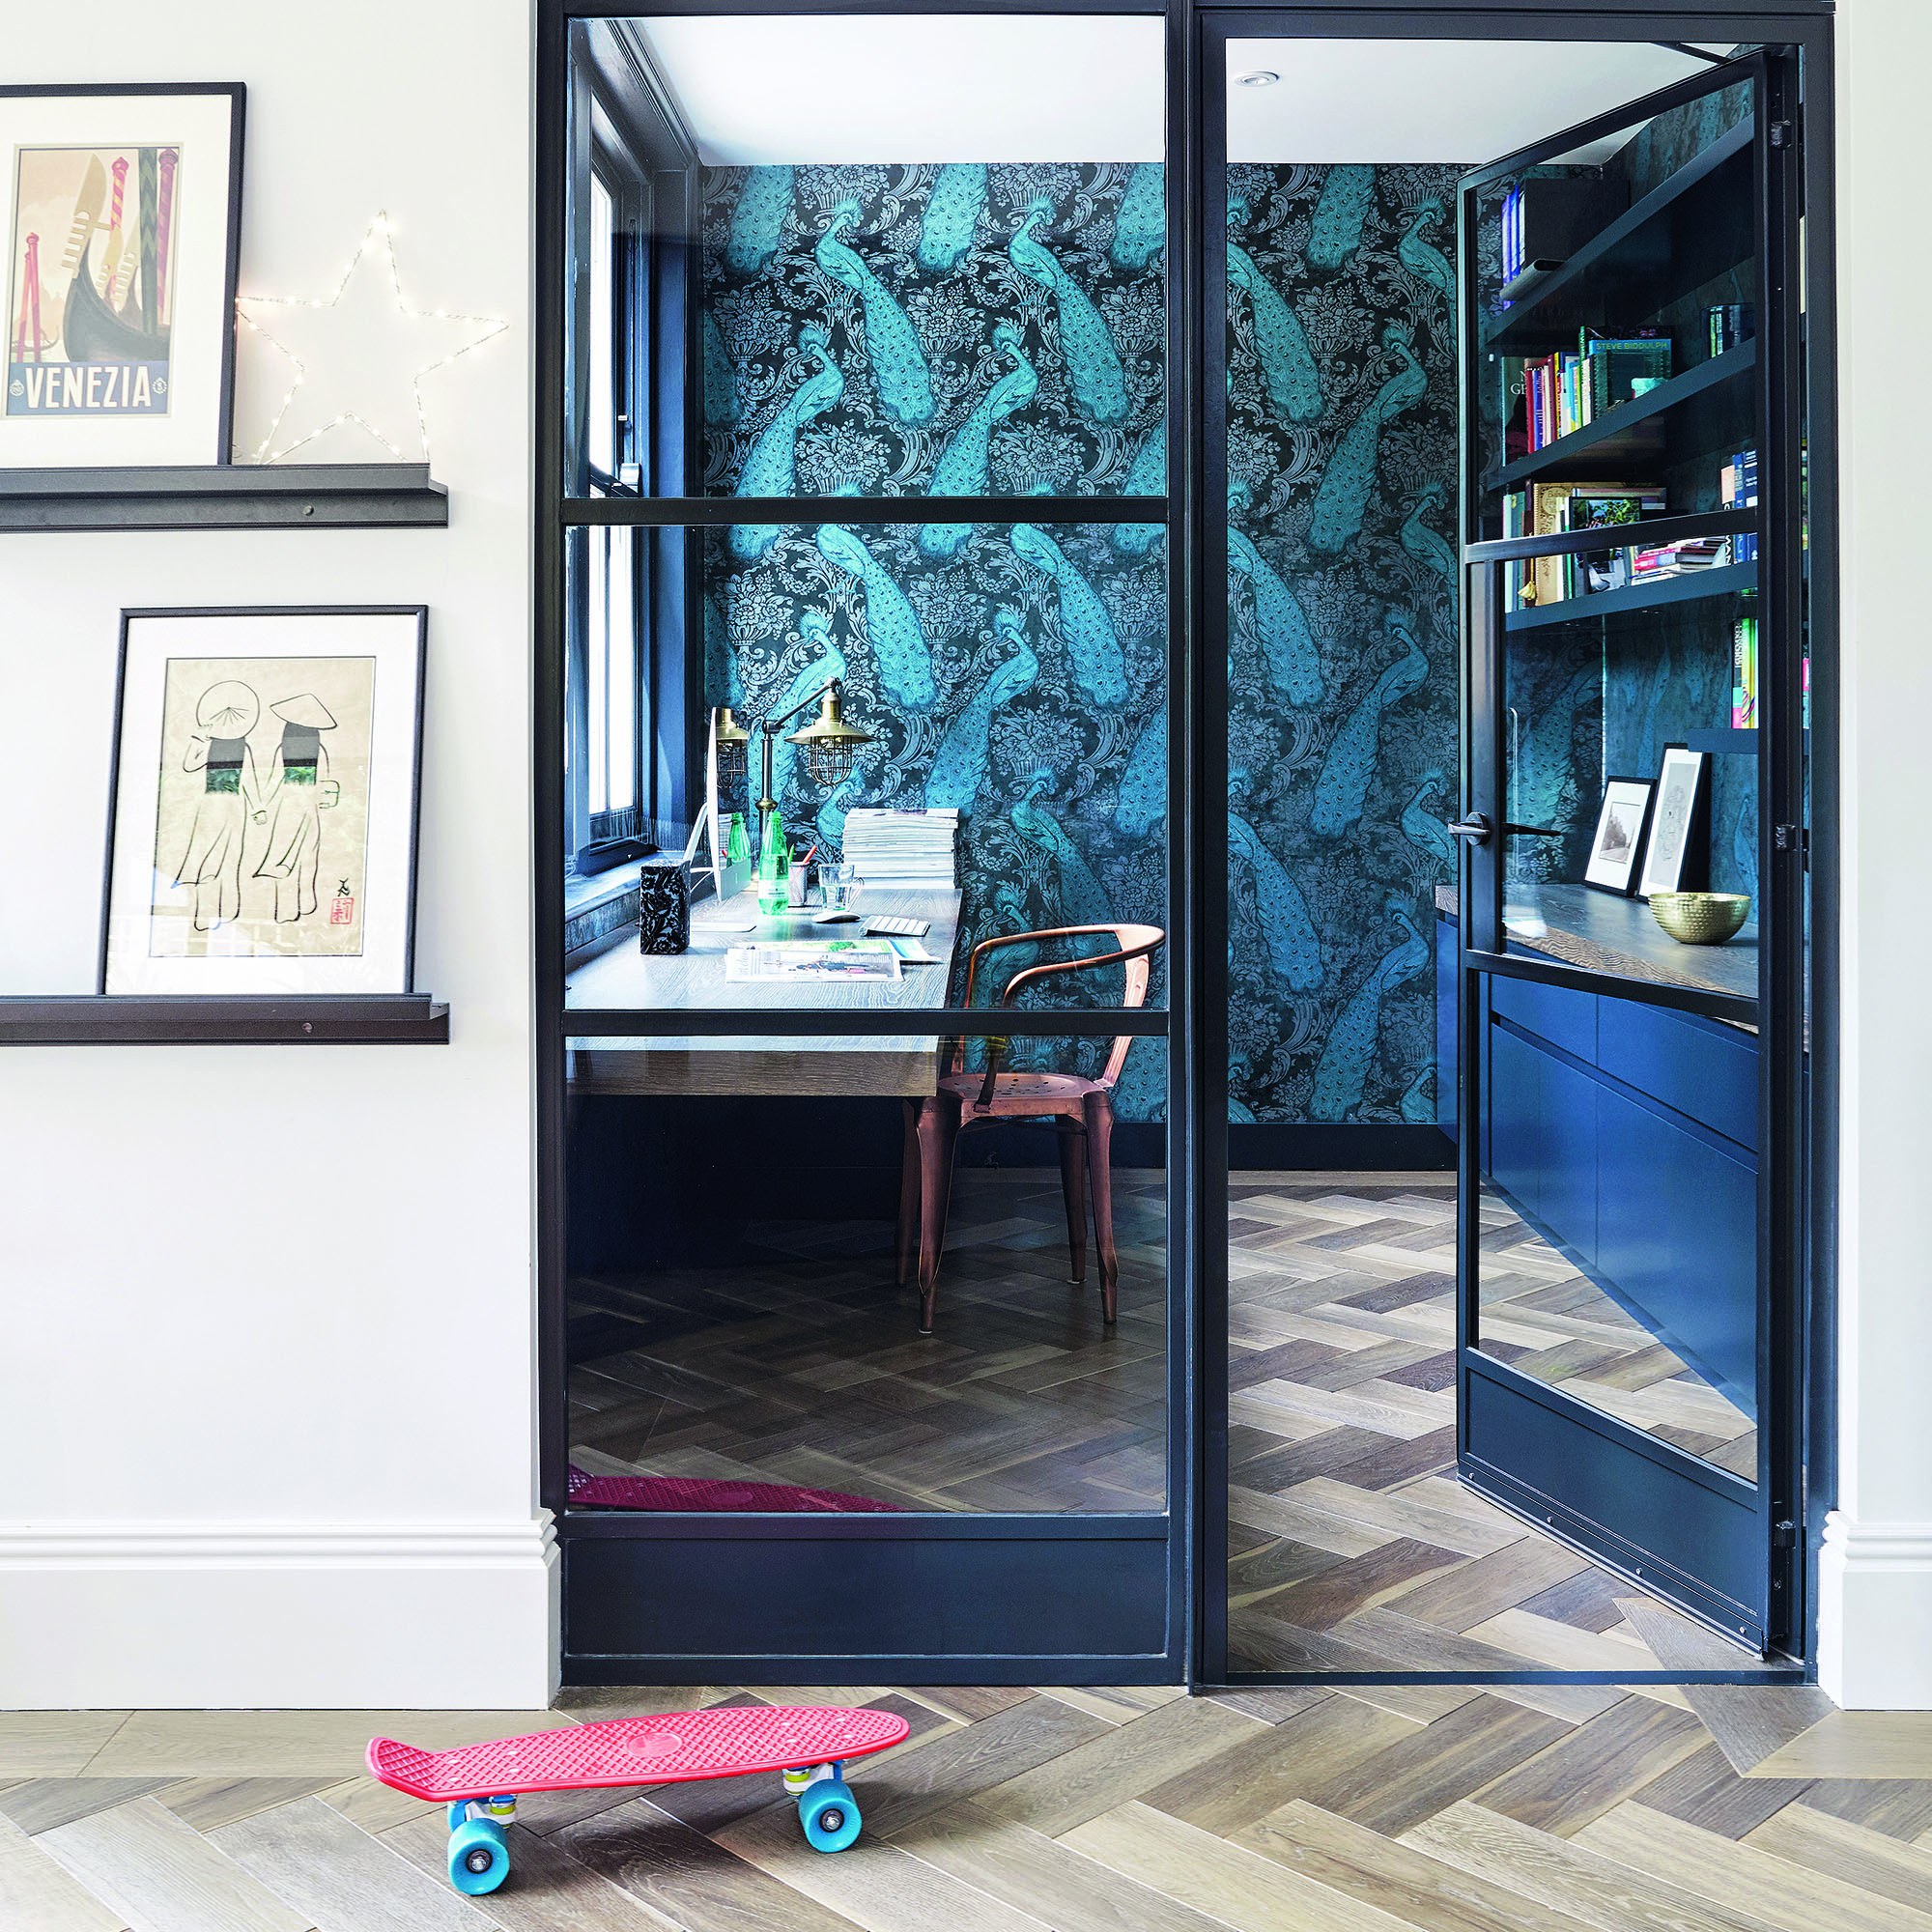 Home office with crittall doors and blue wallpaper.